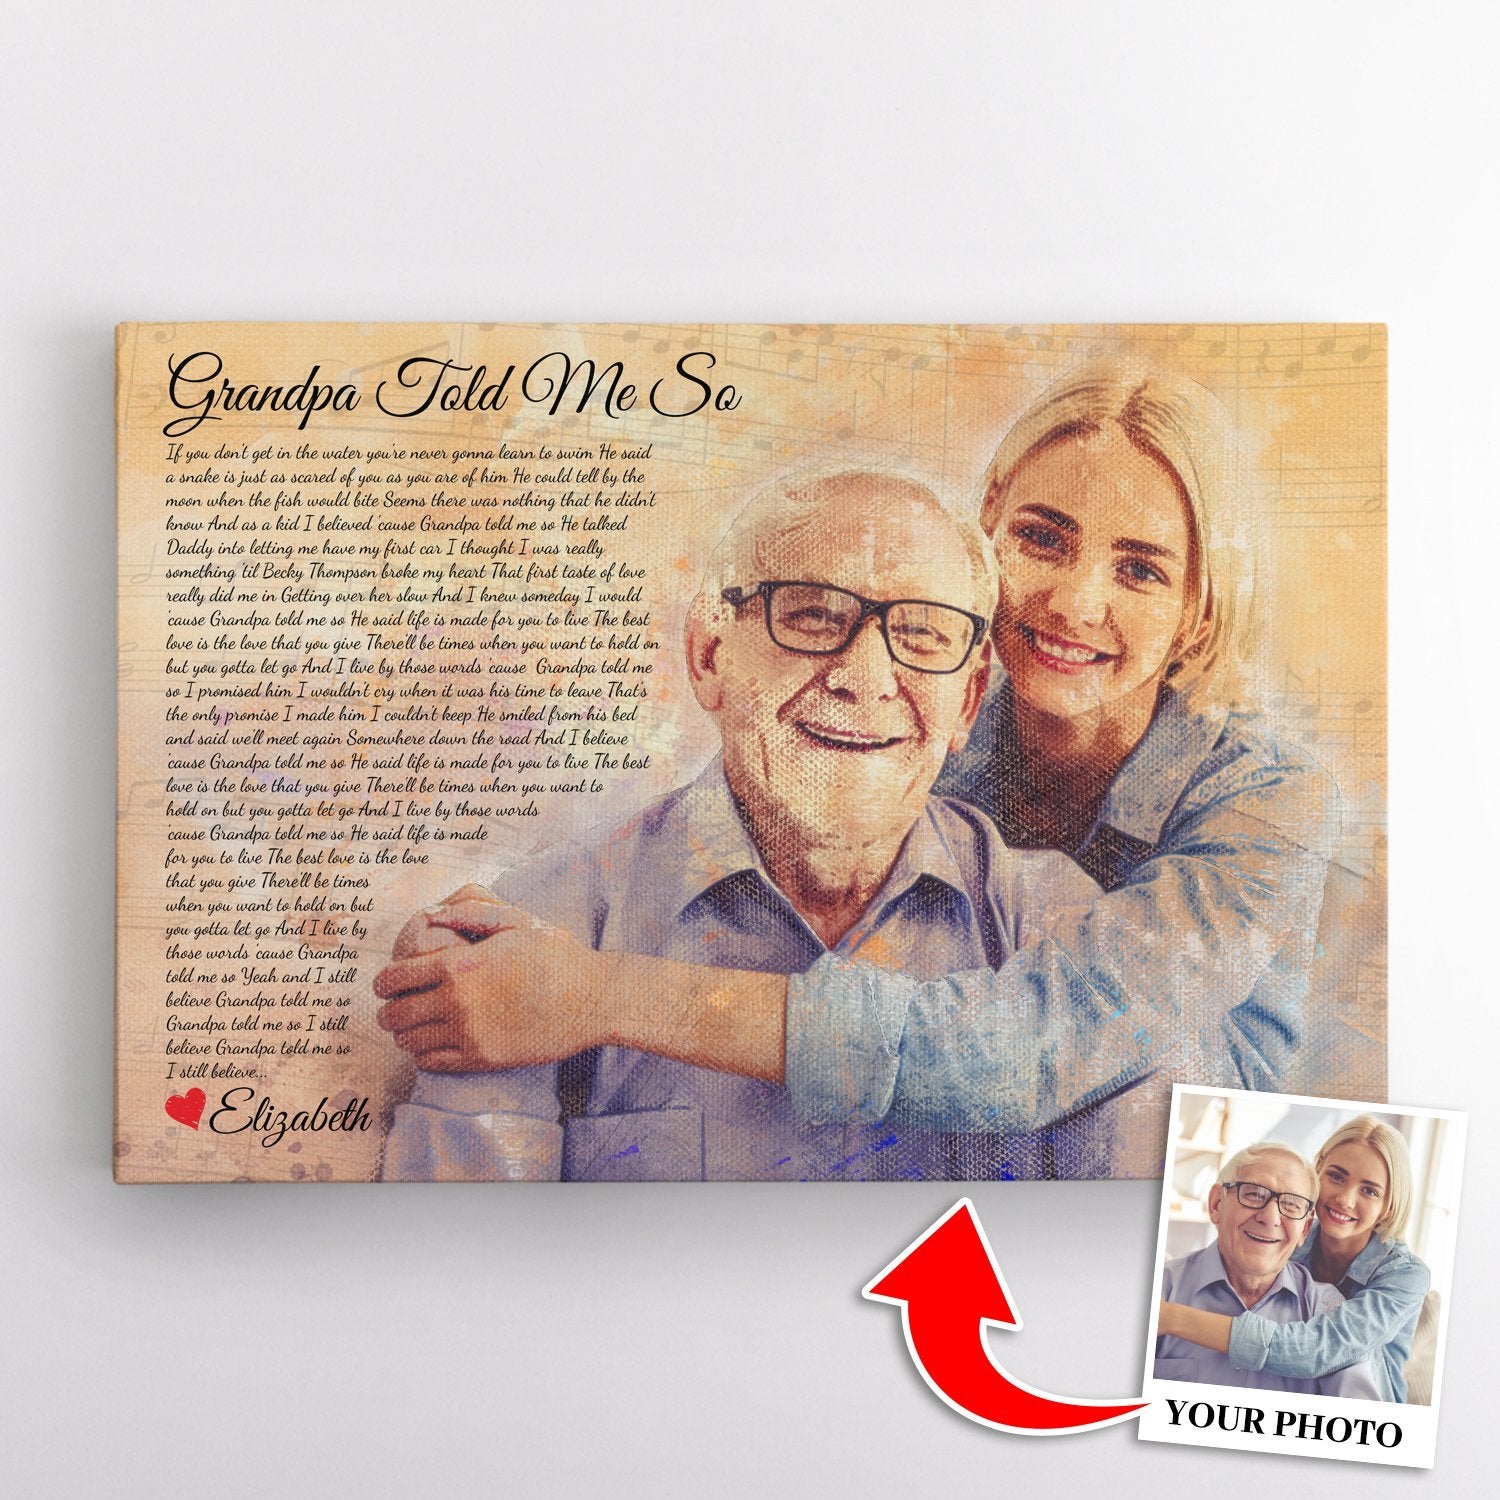 Does your grandpa love listening to music or is he a musician? If yes, why not send him a custom song lyrics wall art as a gift on this fathers day? Just provide his favorite song and a photo to make it more sentimental. The wall art will not only show your love to him but it’s also great song lyric artwork to decorate his house.